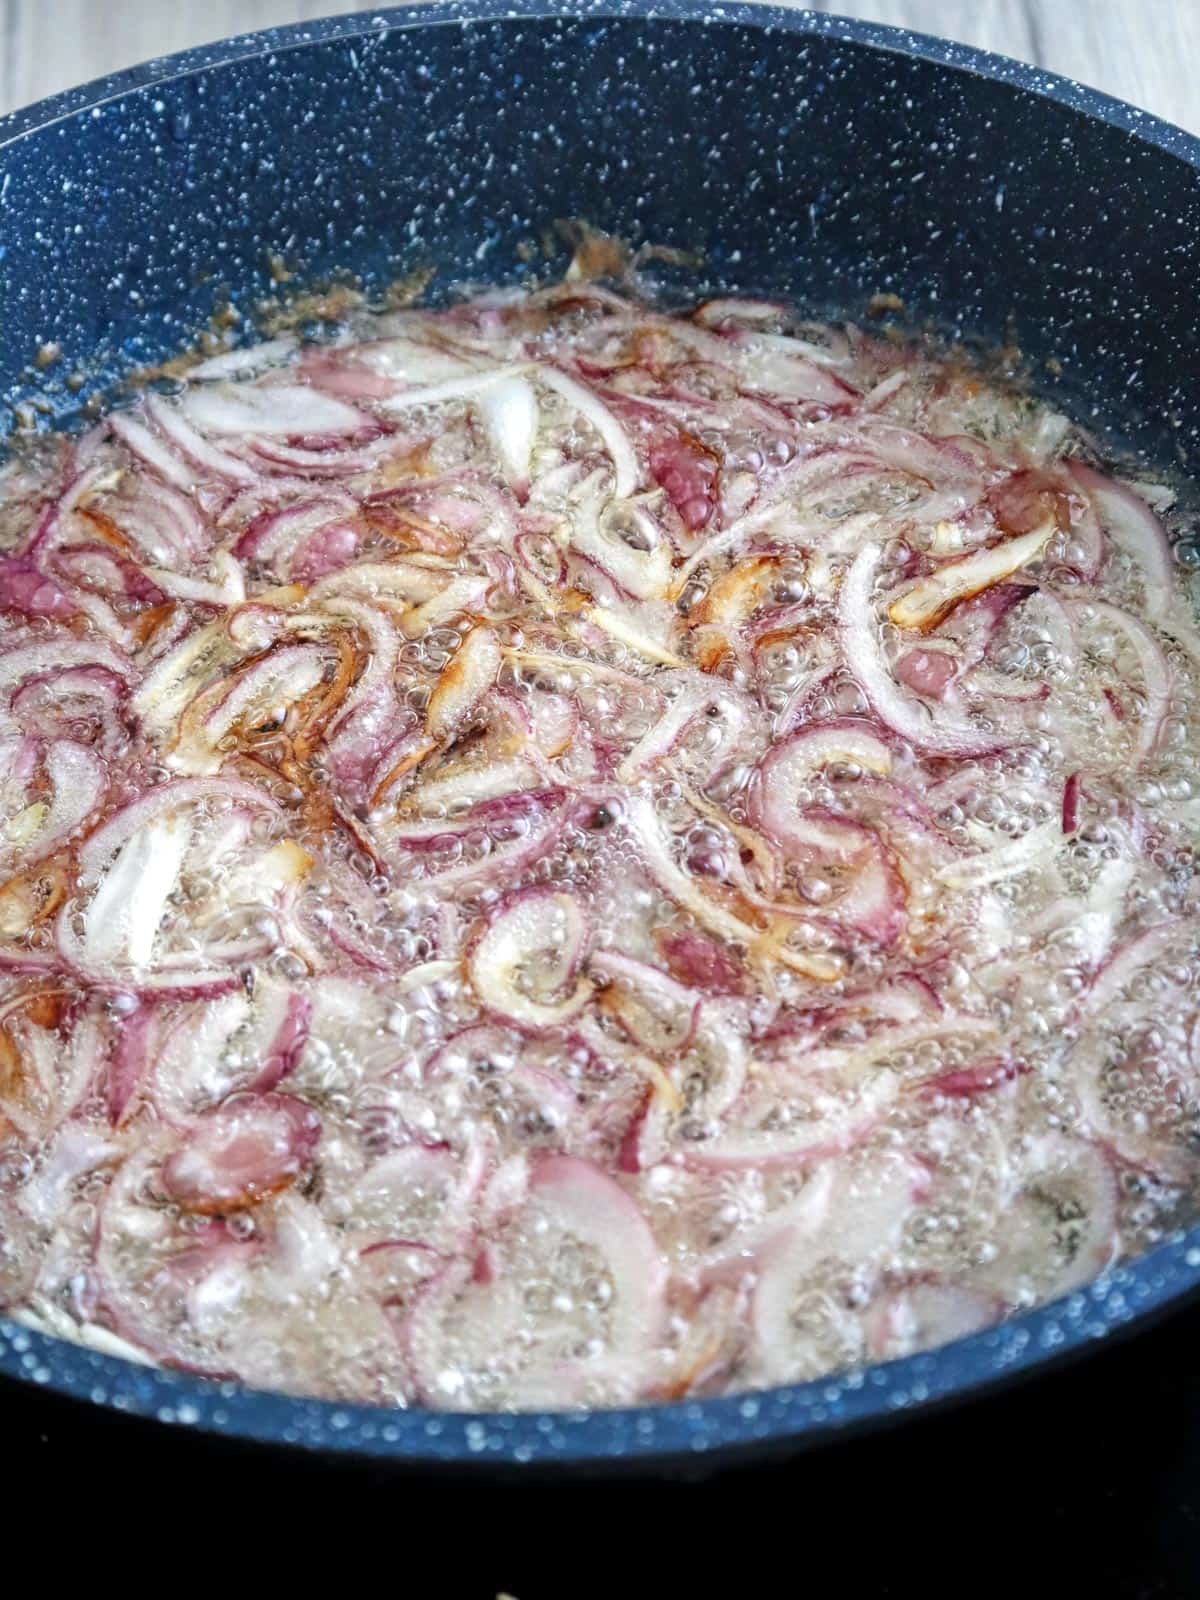 deep-frying sliced shallots in hot oil in a pan